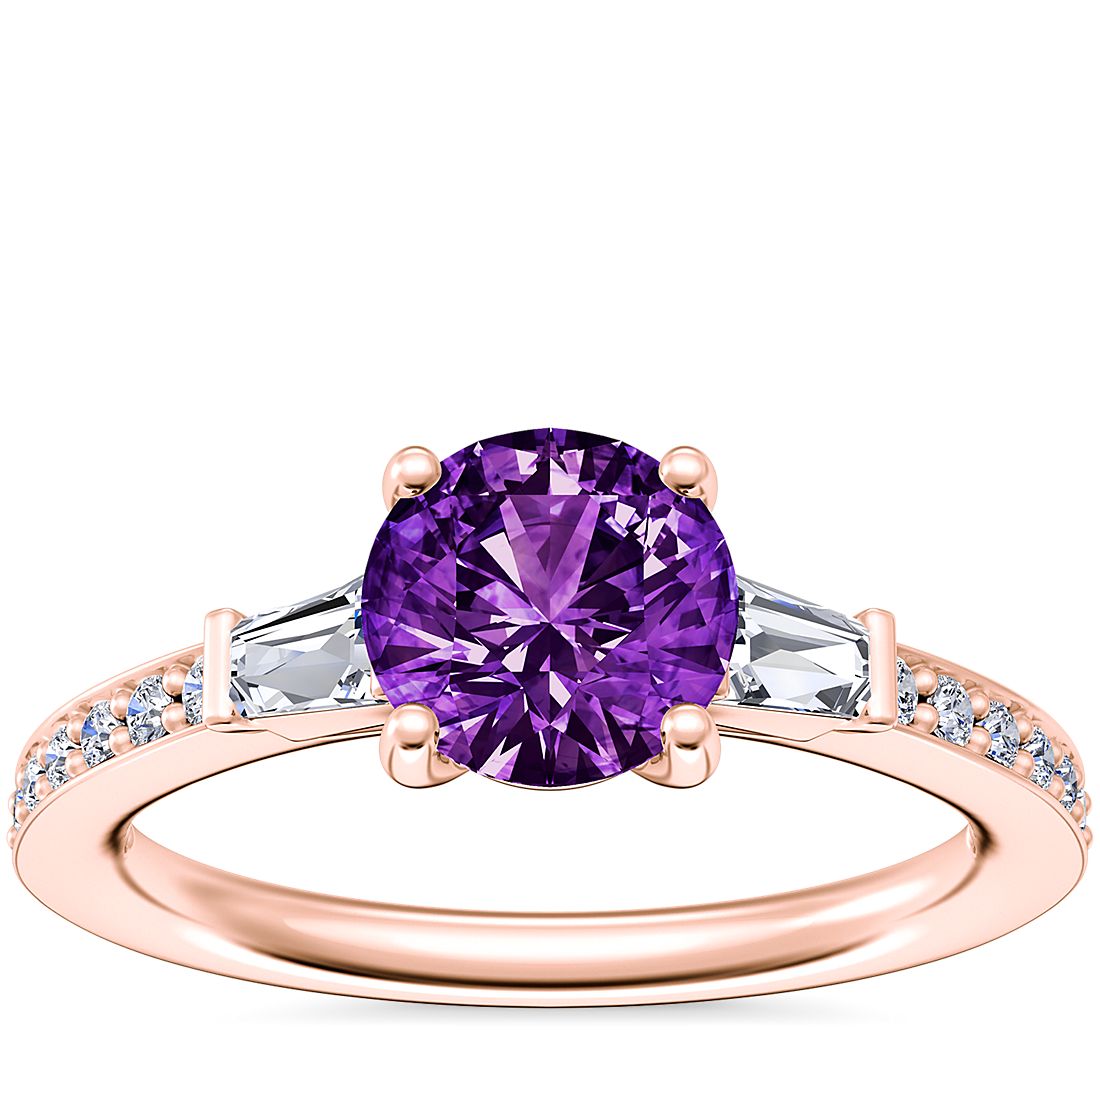 Tapered Baguette Diamond Cathedral Engagement Ring with Round Amethyst in 14k Rose Gold (6.5mm)